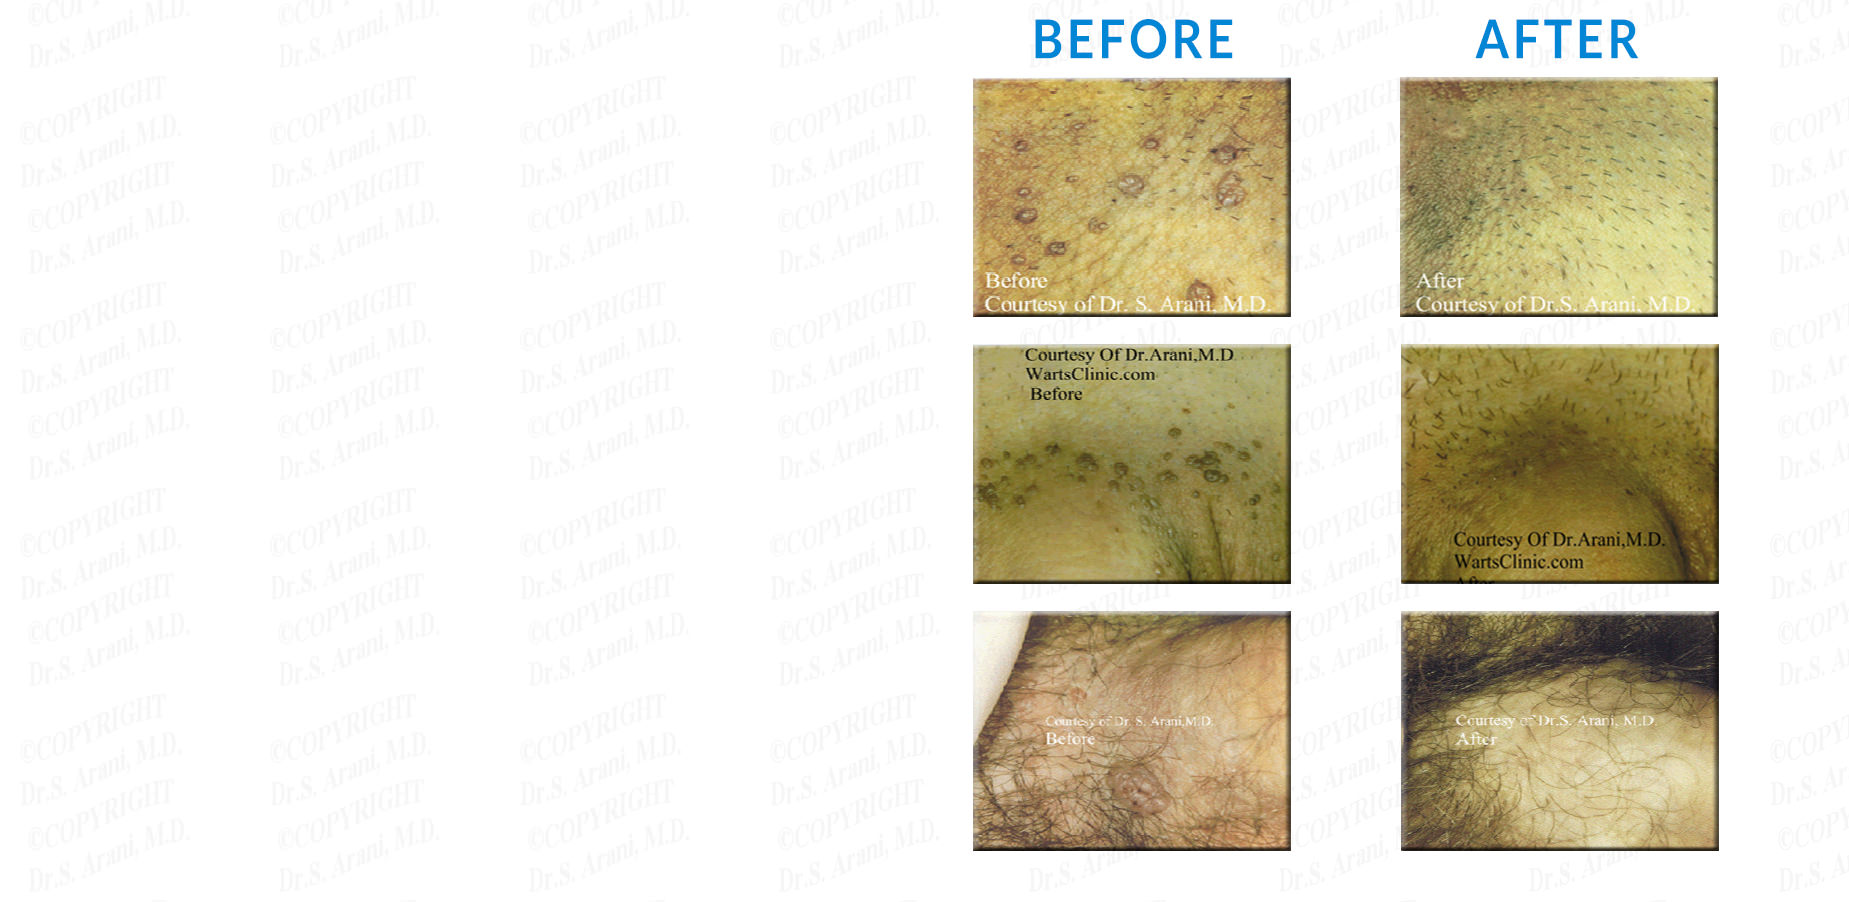 Before and After Photos - Genital Warts Treatment